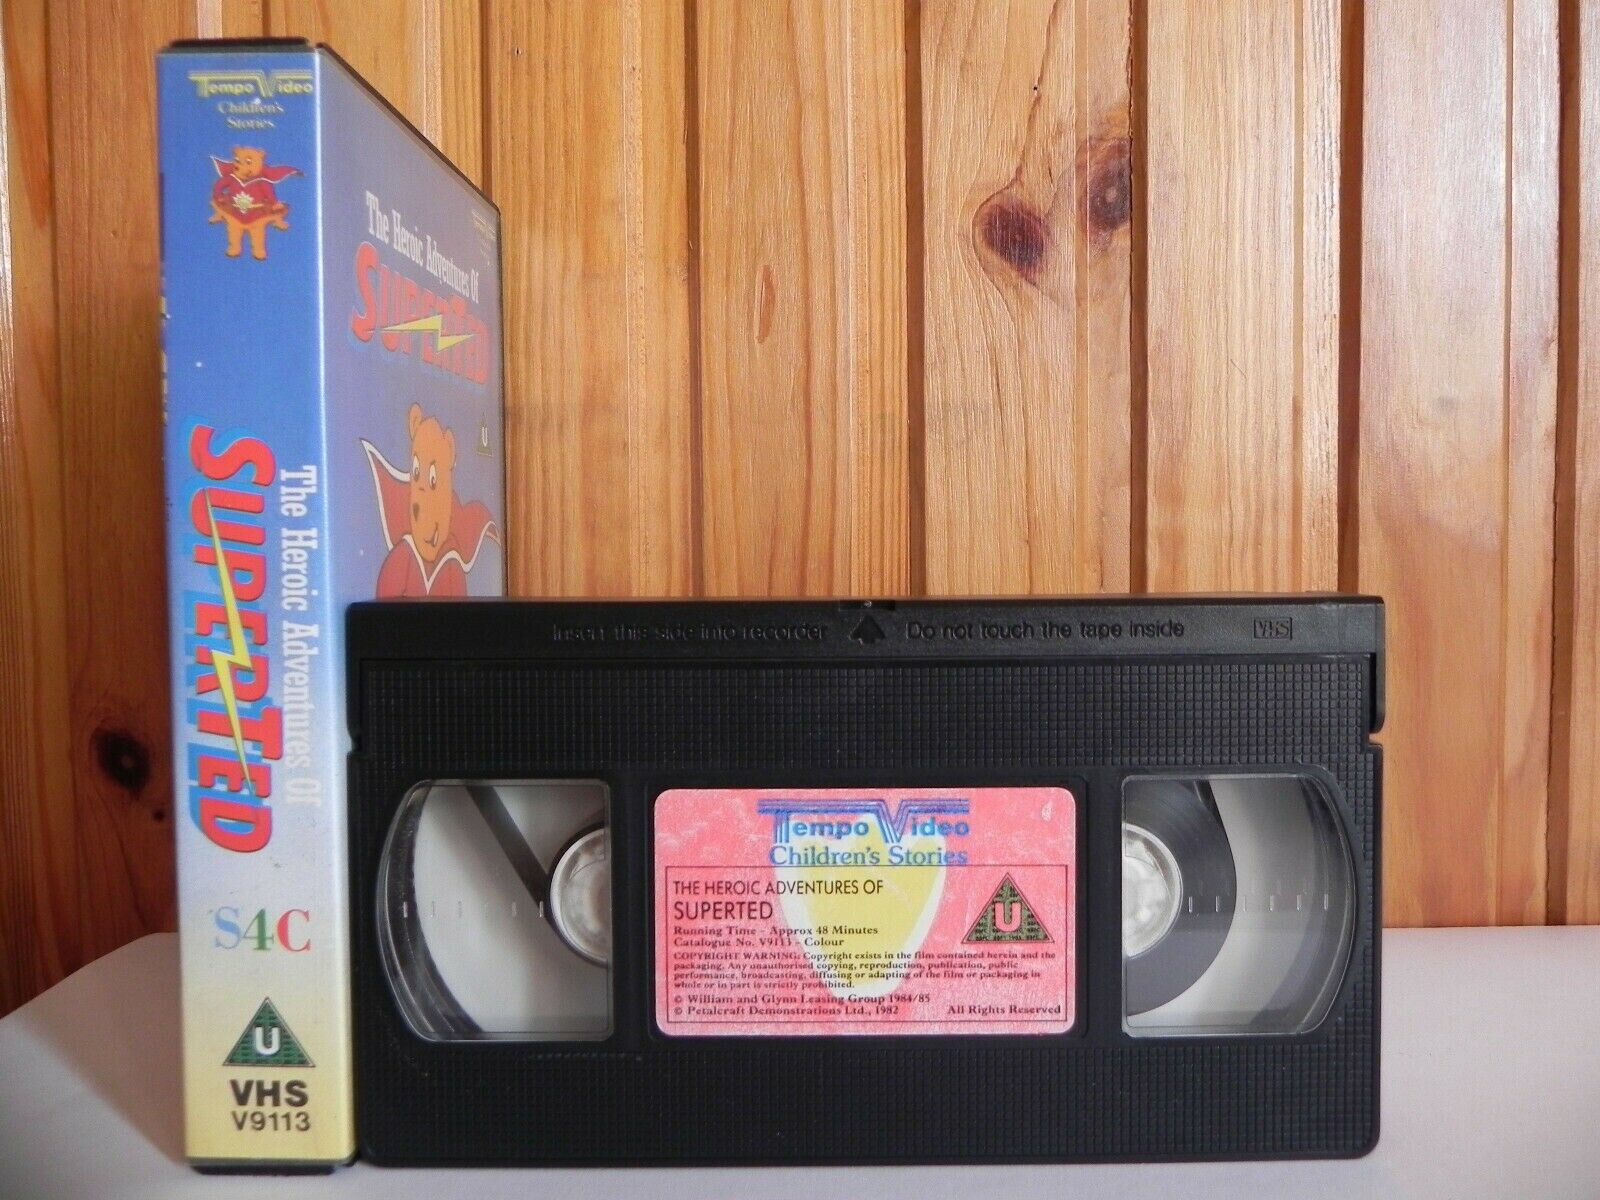 Super Ted: Superhero SuperTed & Spotty Man (1986) Texas Pete - Animated - VHS-